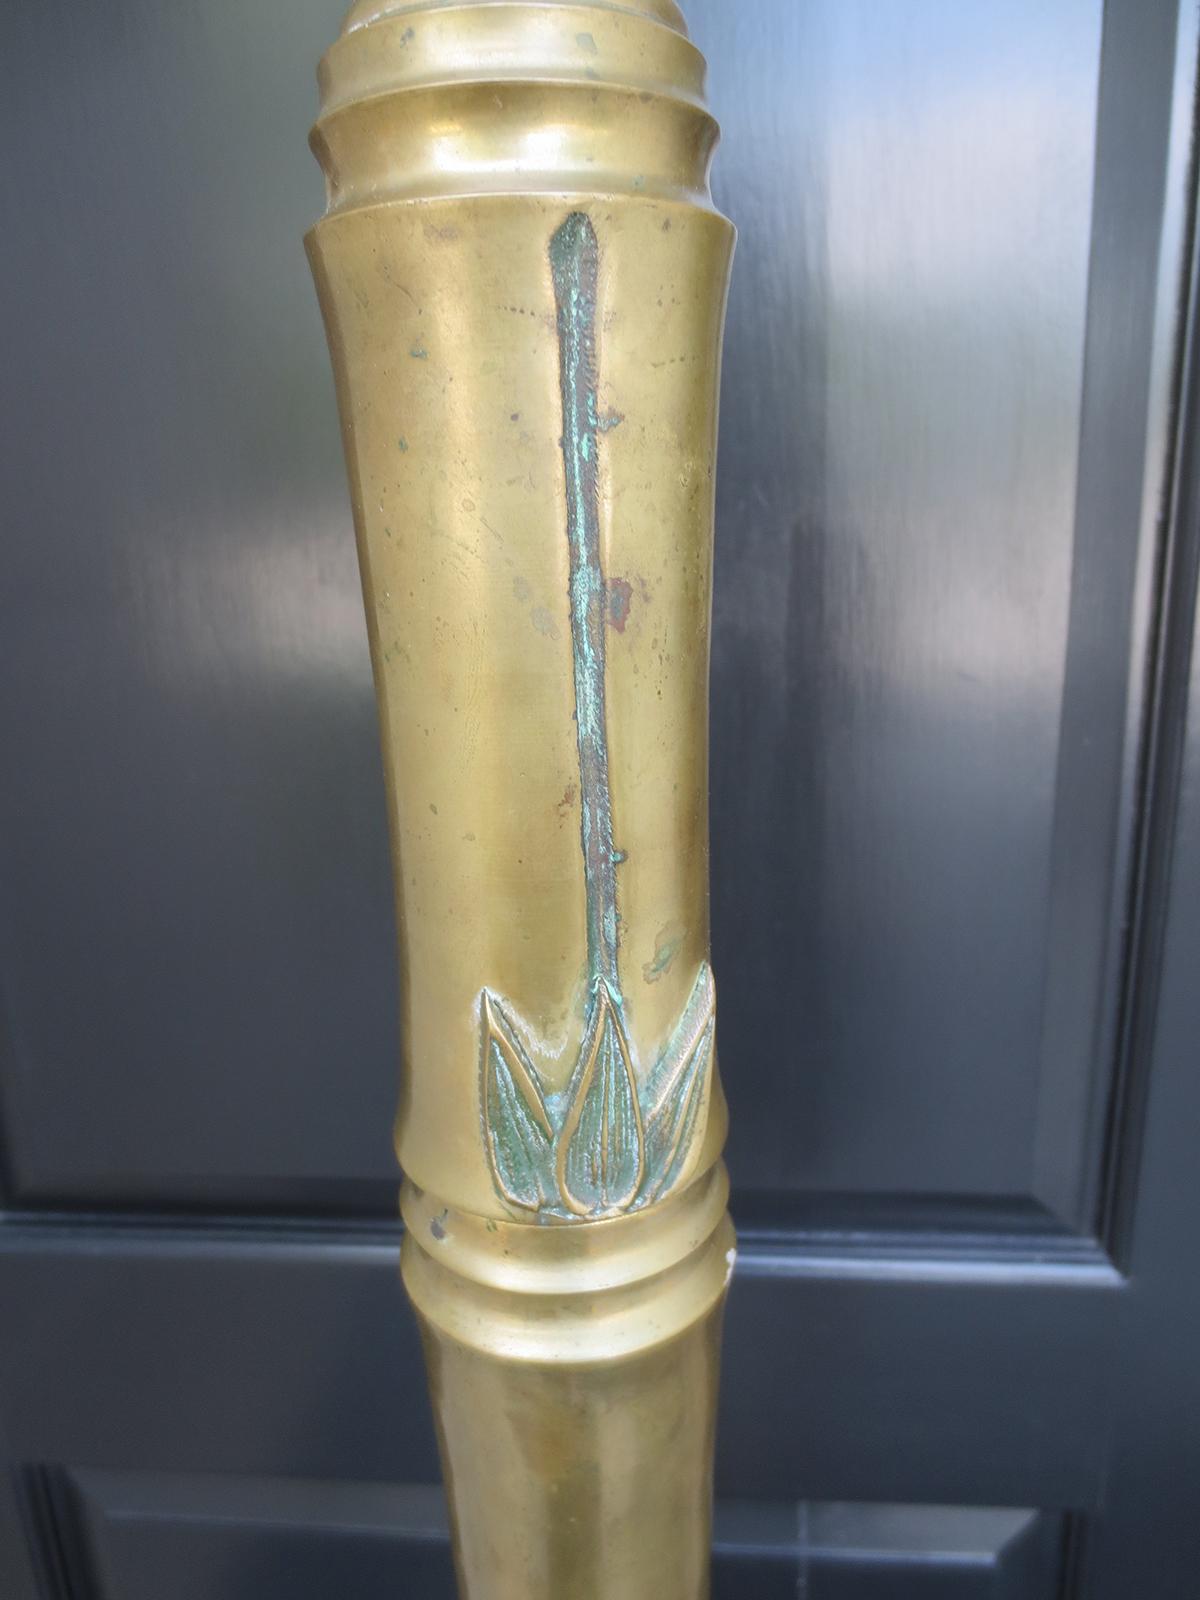 Mid-20th century brass faux bamboo floor lamp.
New wirings.